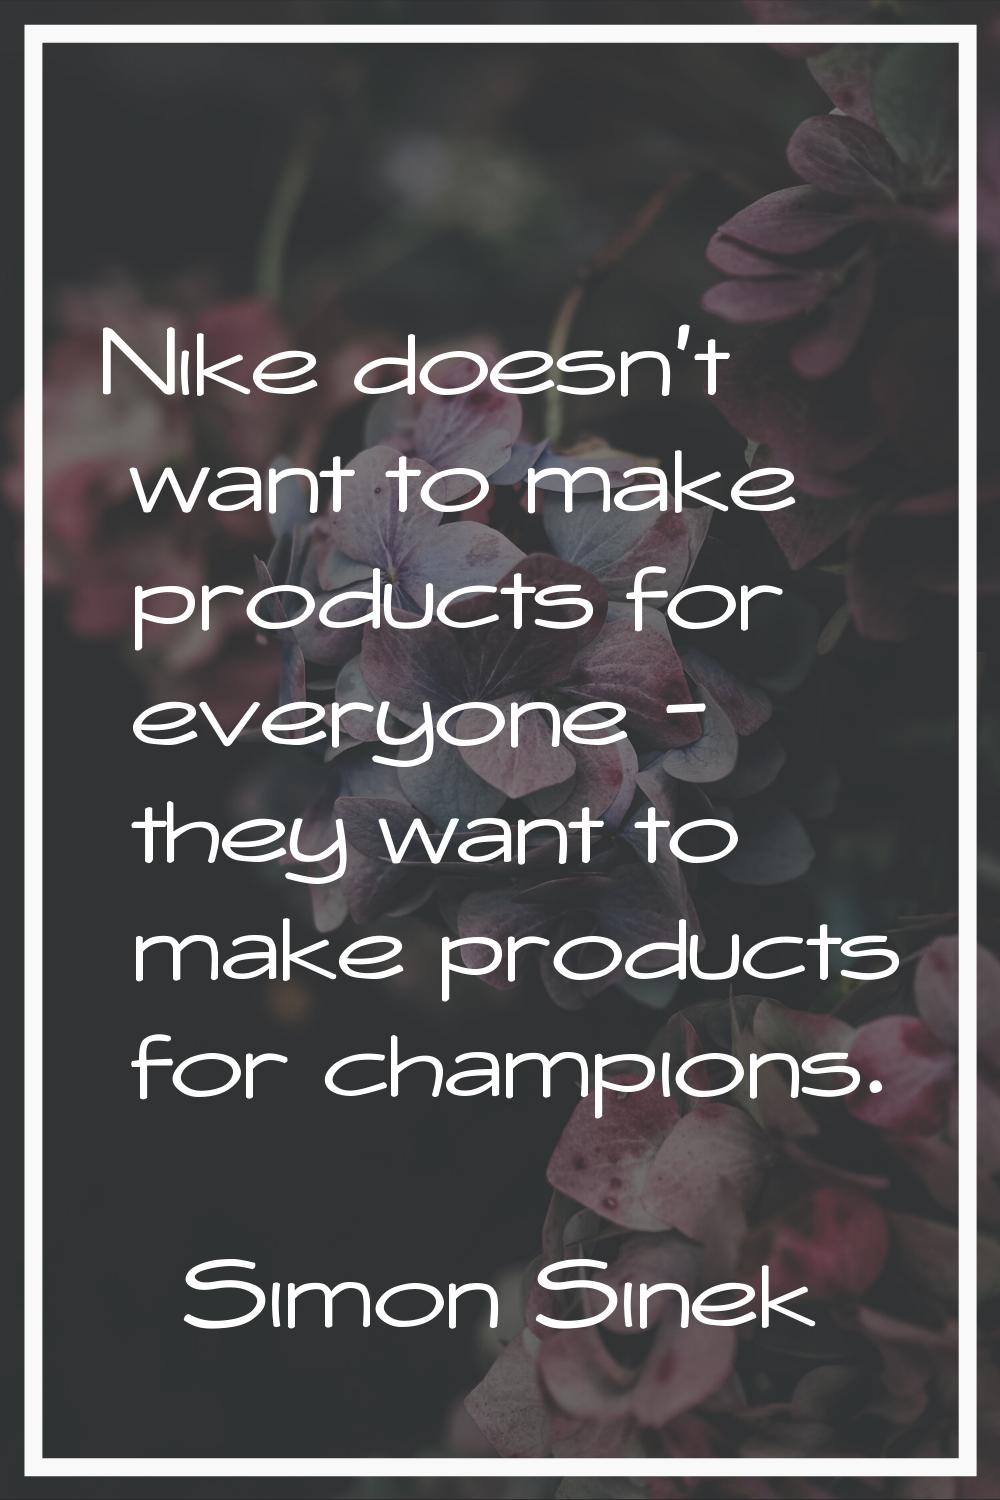 Nike doesn't want to make products for everyone - they want to make products for champions.